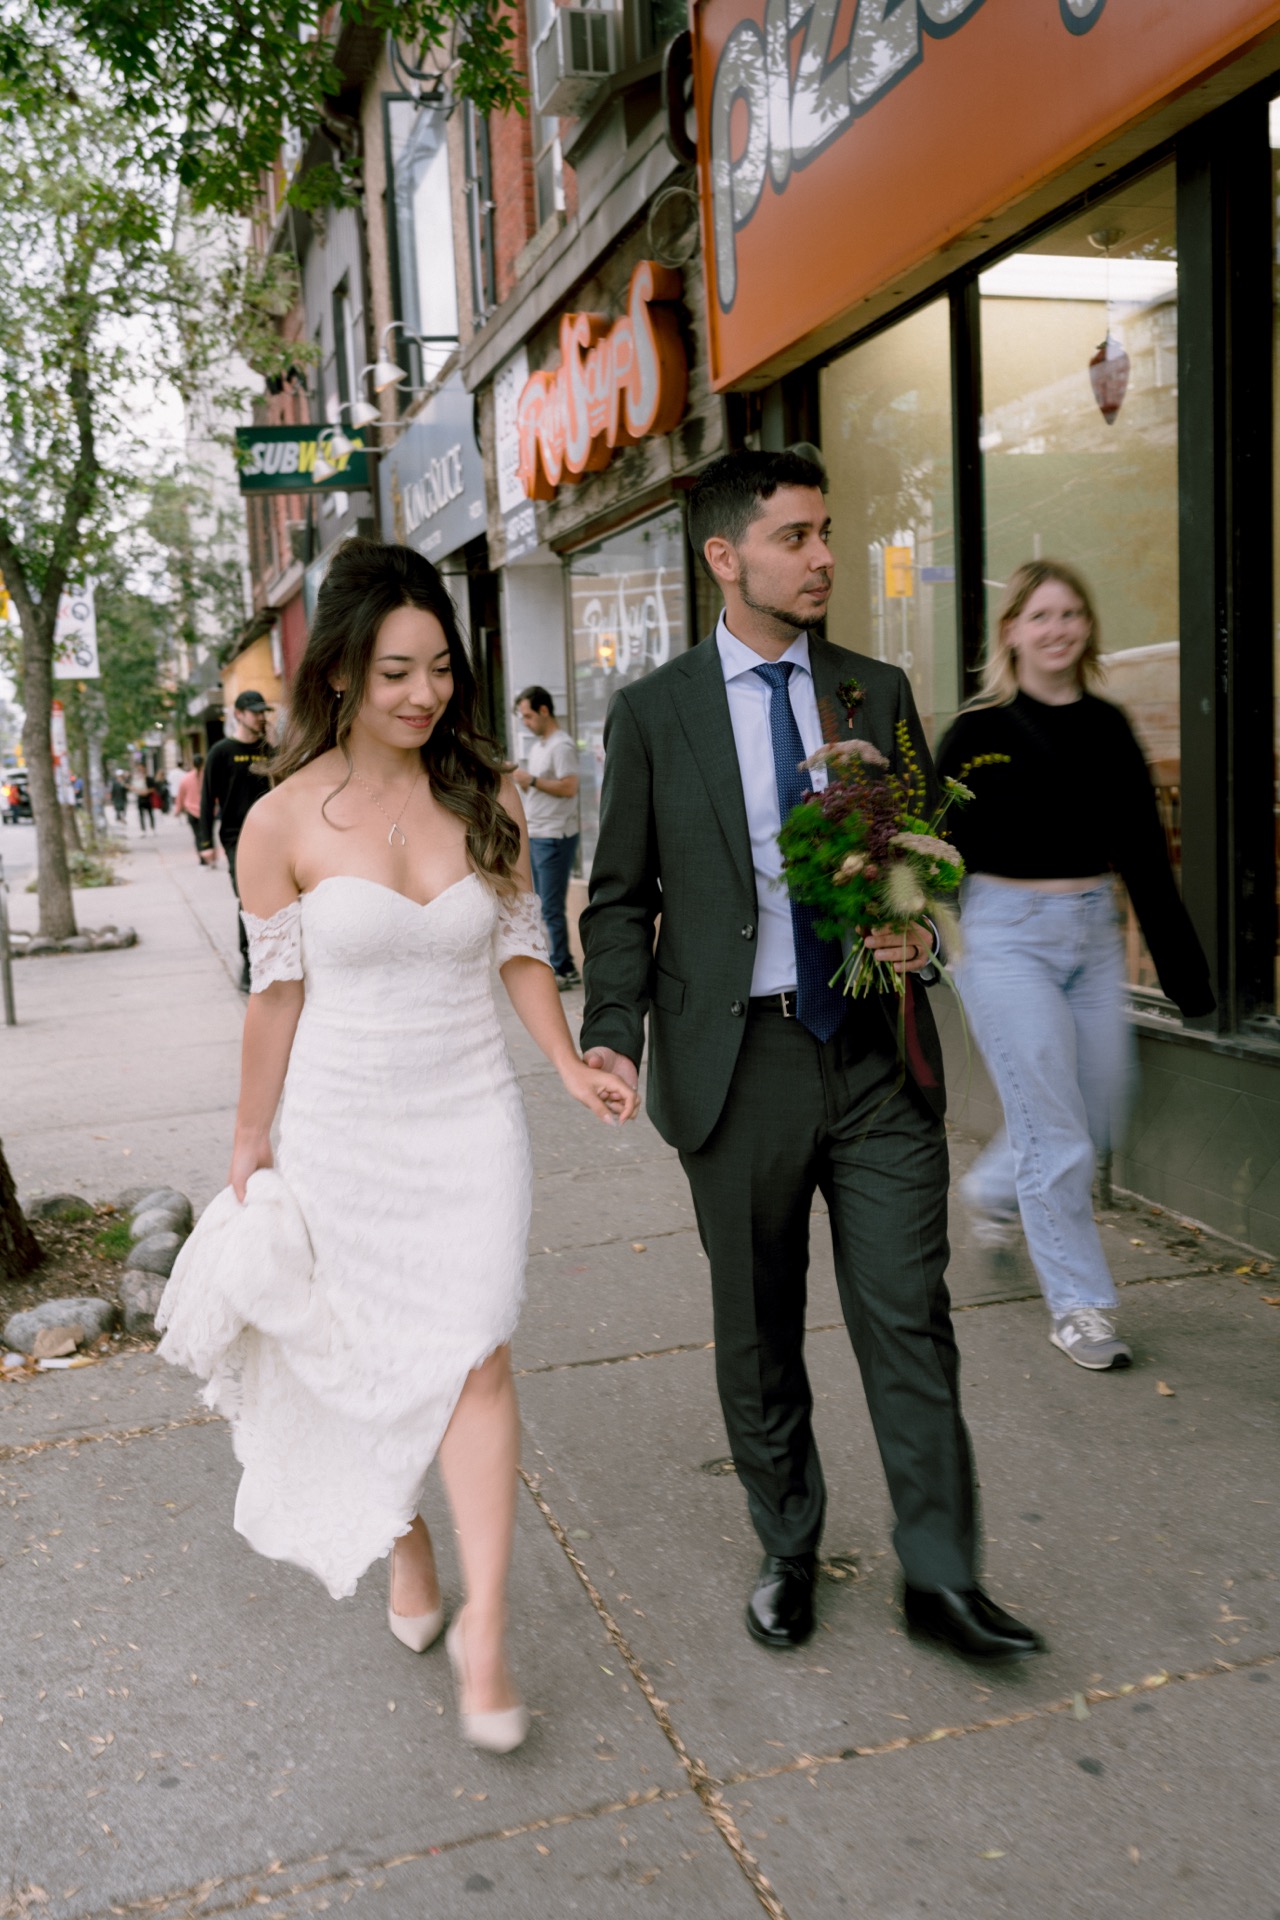 Couple in wedding attire holding hands while walking on a city sidewalk